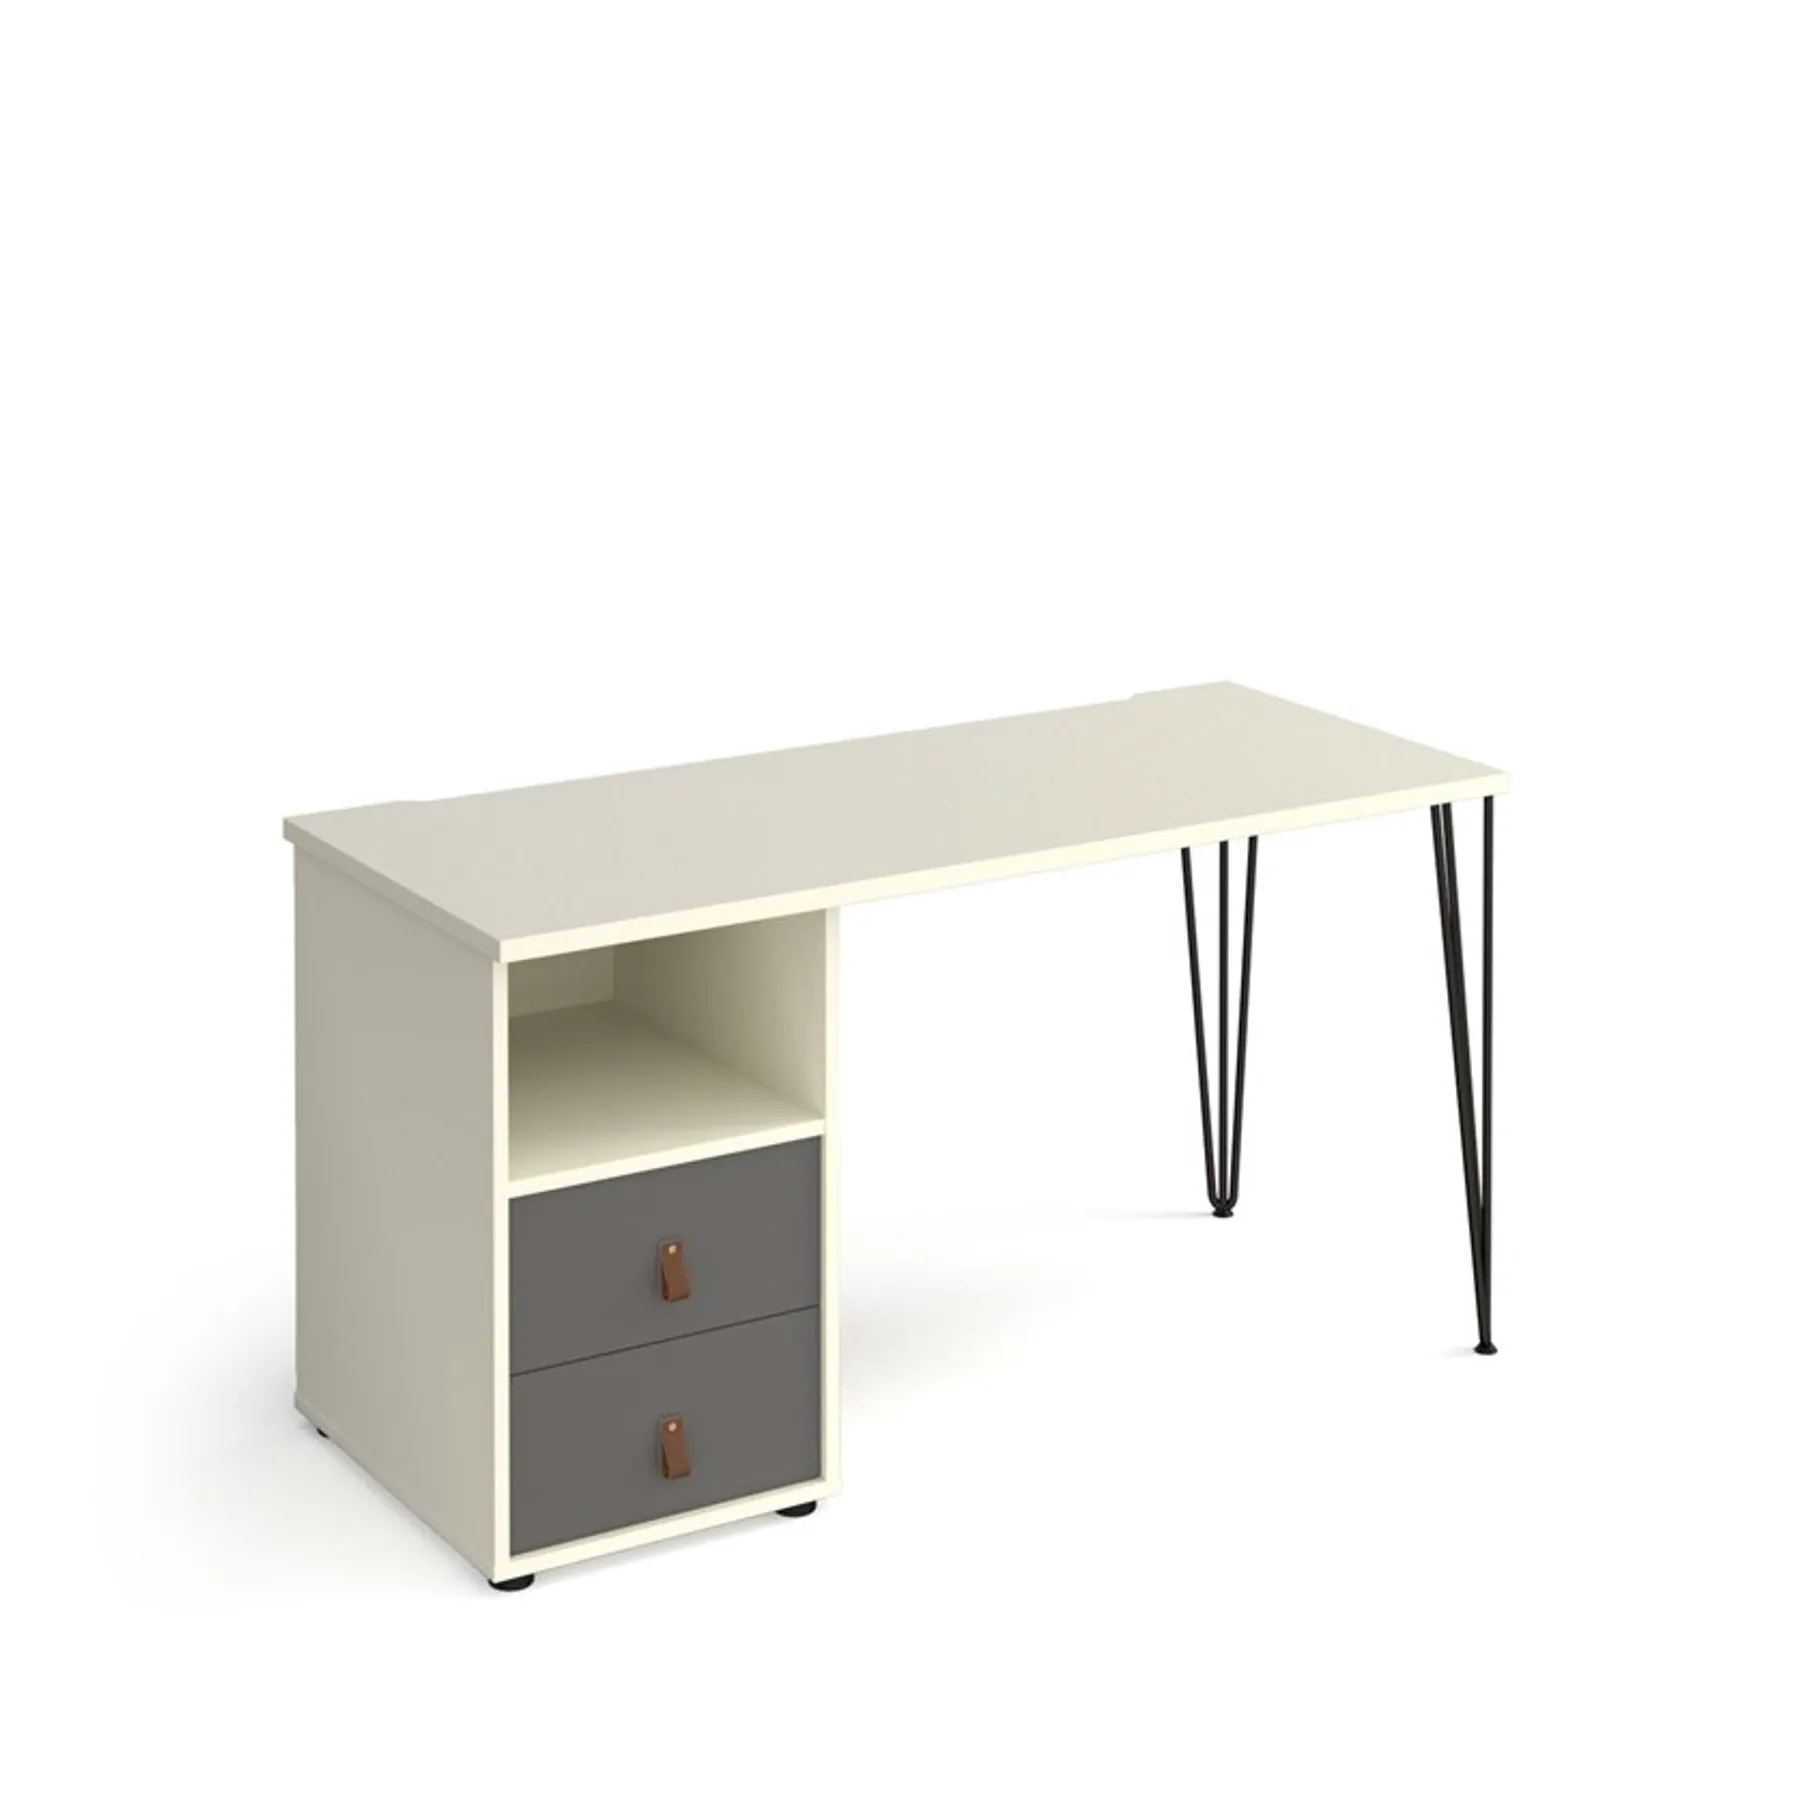 LOF Direct Dams Tikal Hairpin Home Office Desk with drawers White Grey TK614 P D